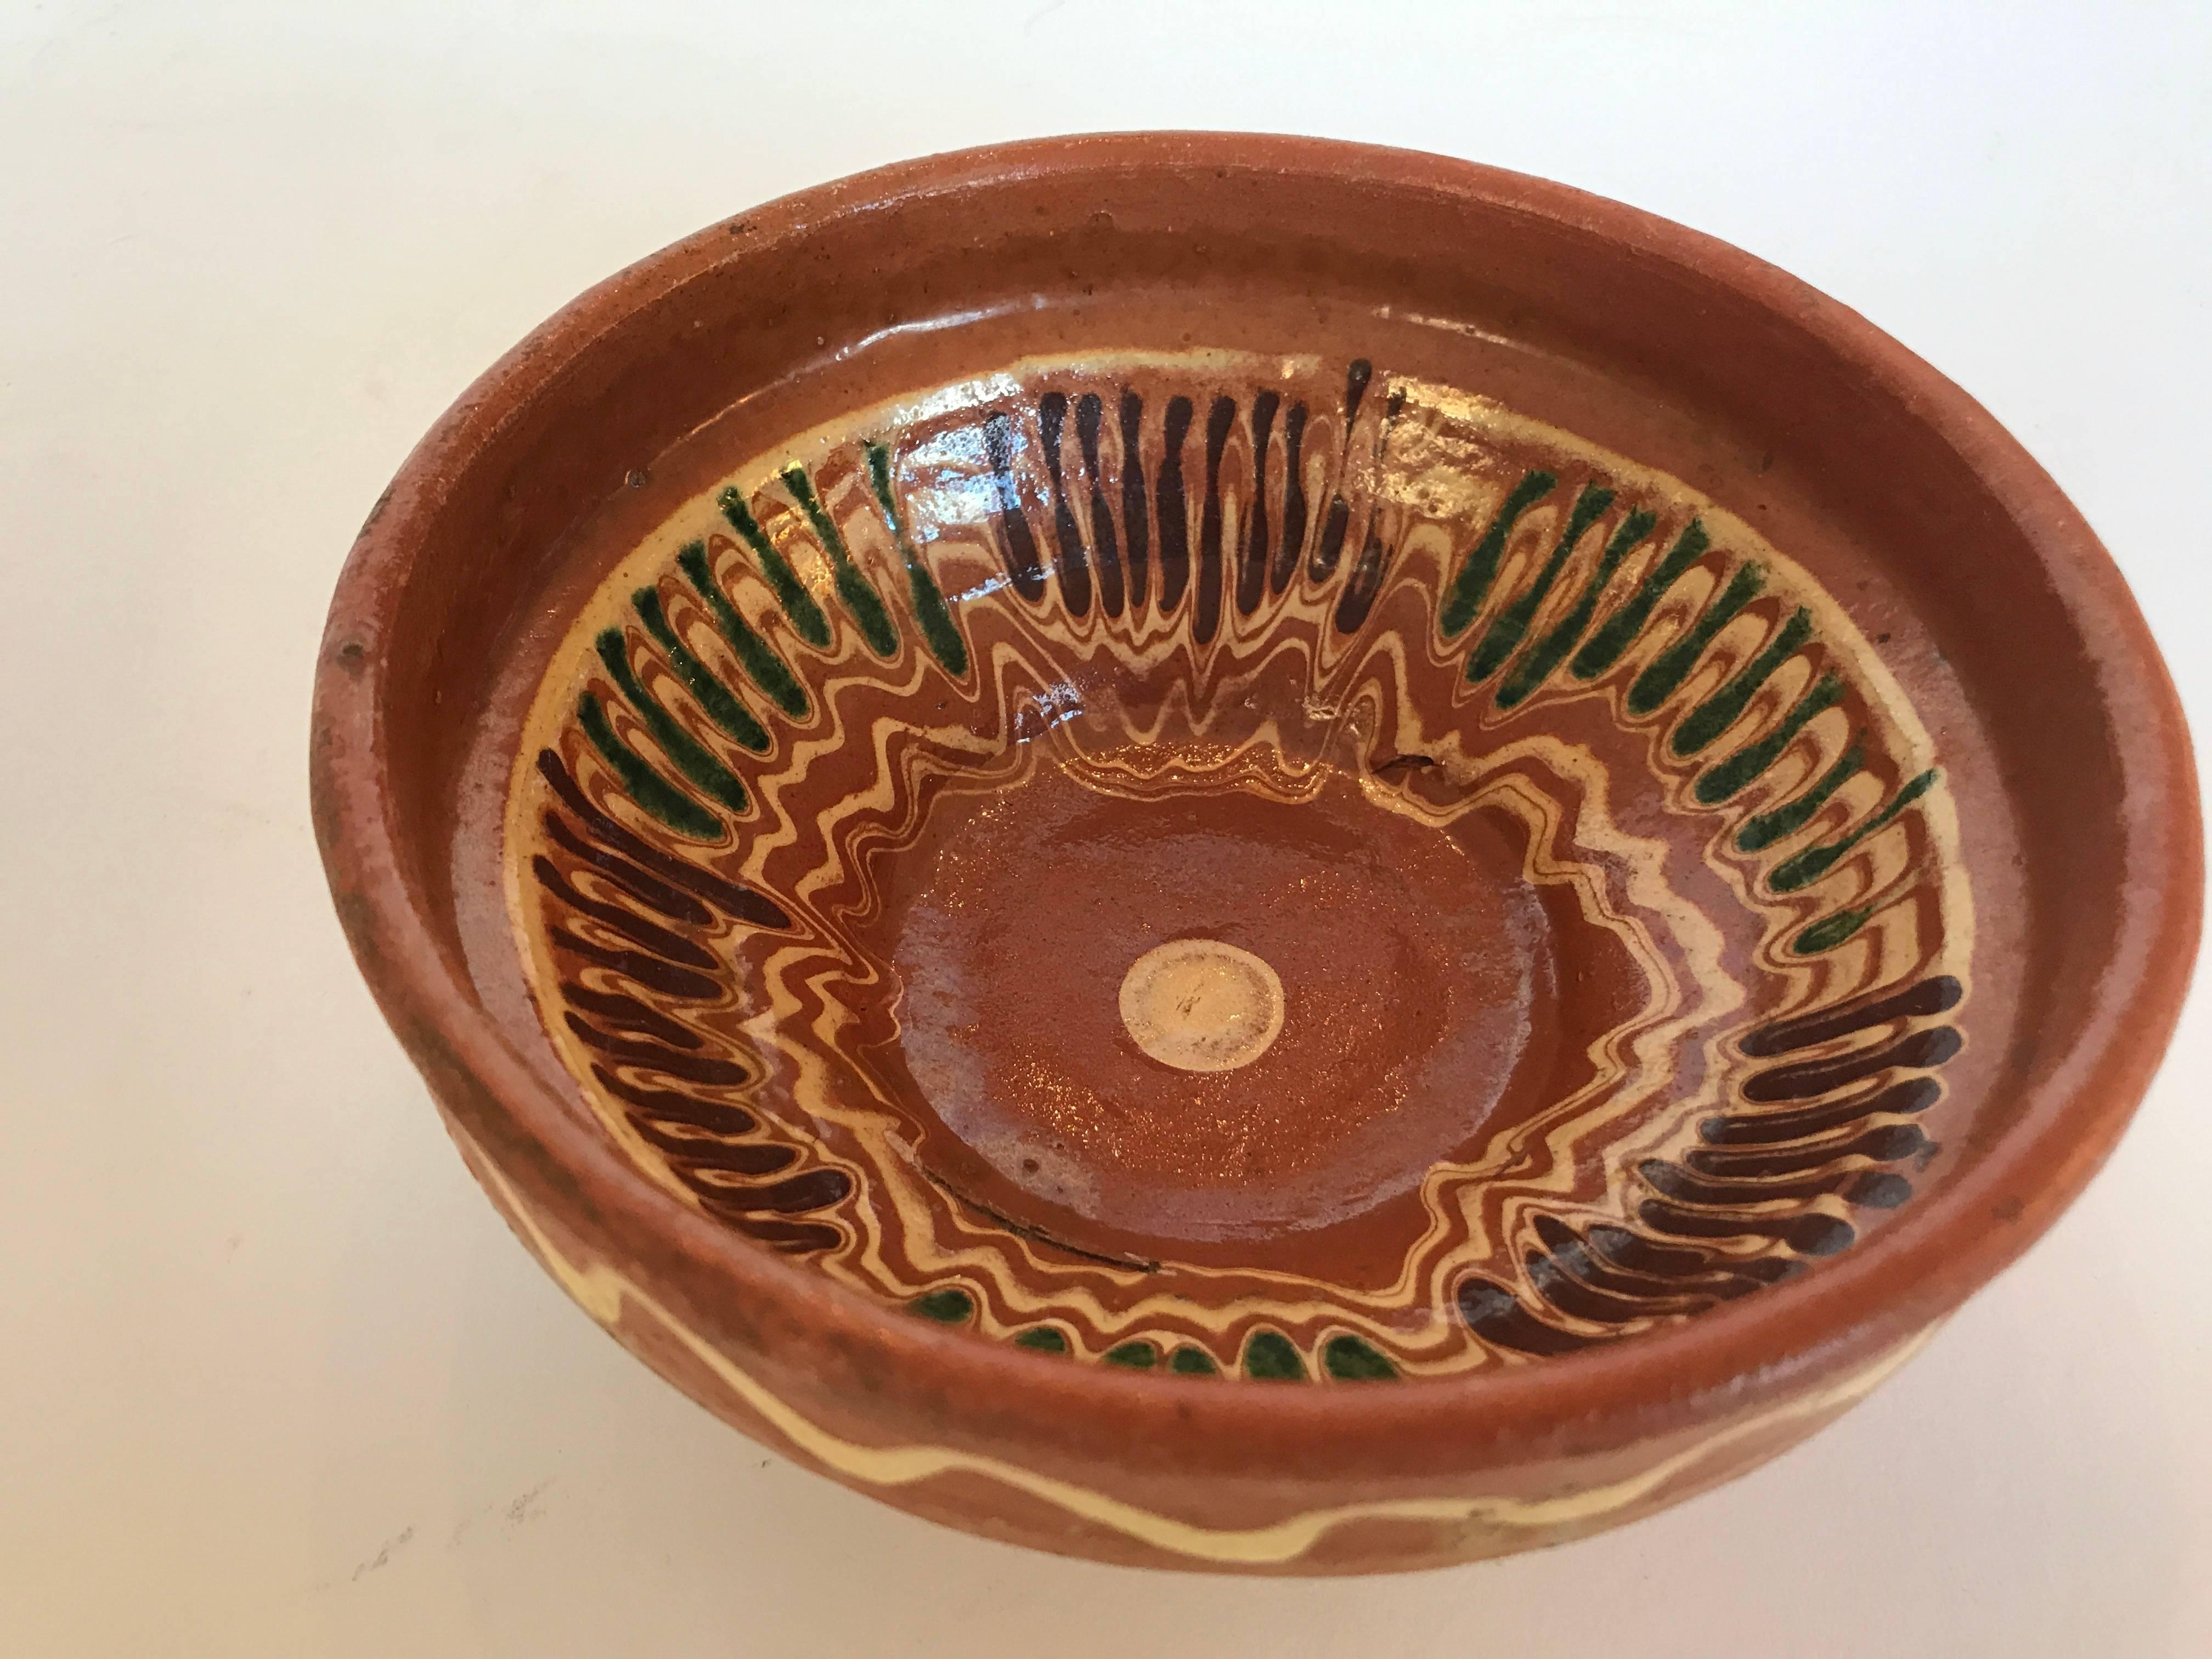 Transylvania Vintage Pottery, Hand-Painted Redware with Folk Art Designs In Excellent Condition For Sale In Glen Ellyn, IL